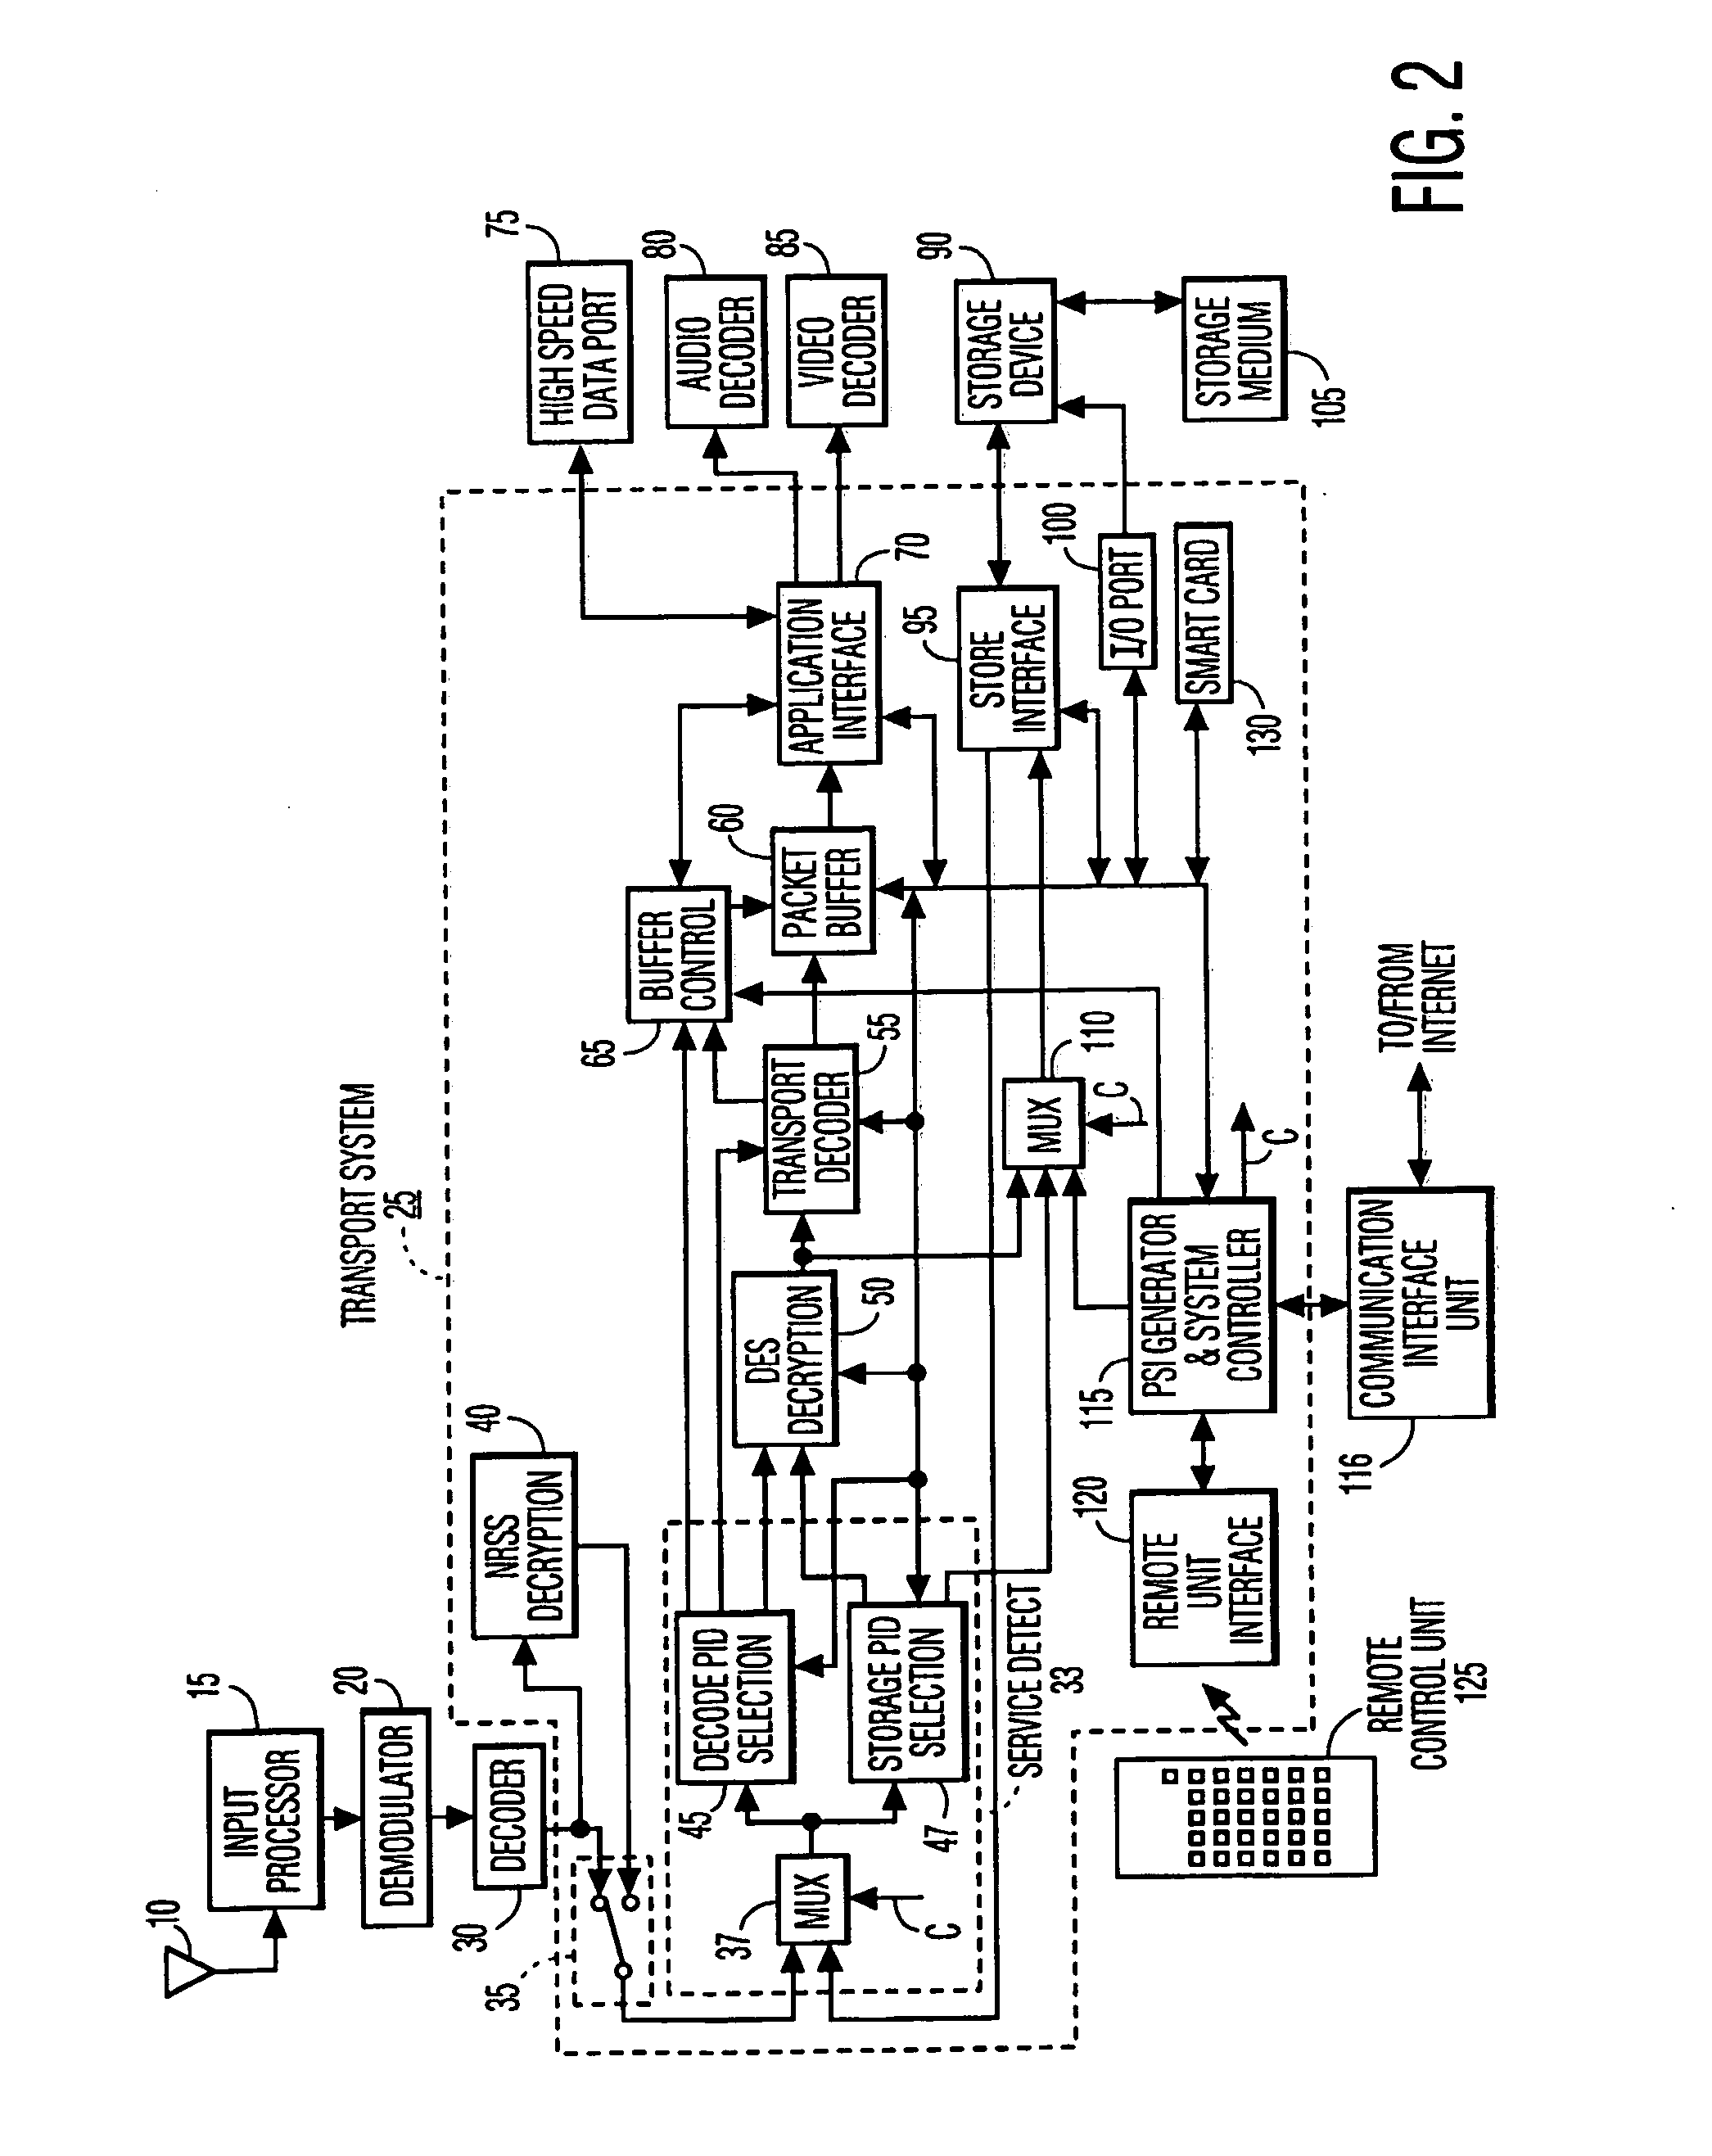 System and method for creating user profiles